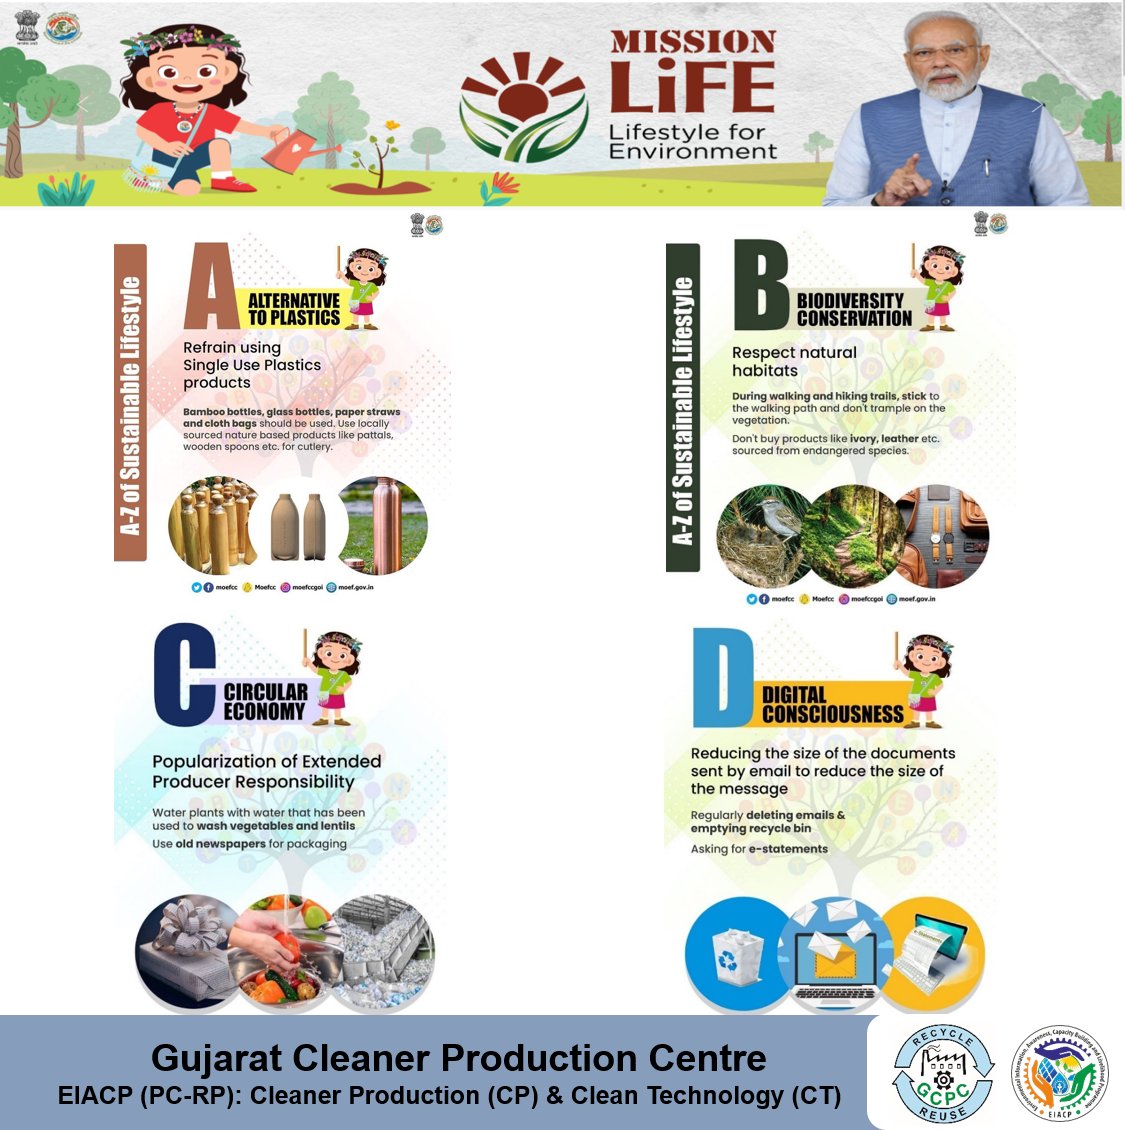 'A-Z of Sustainable Lifestyle'
@moefcc @EIACPIndia 
#ChooseLiFE #MissionLiFE